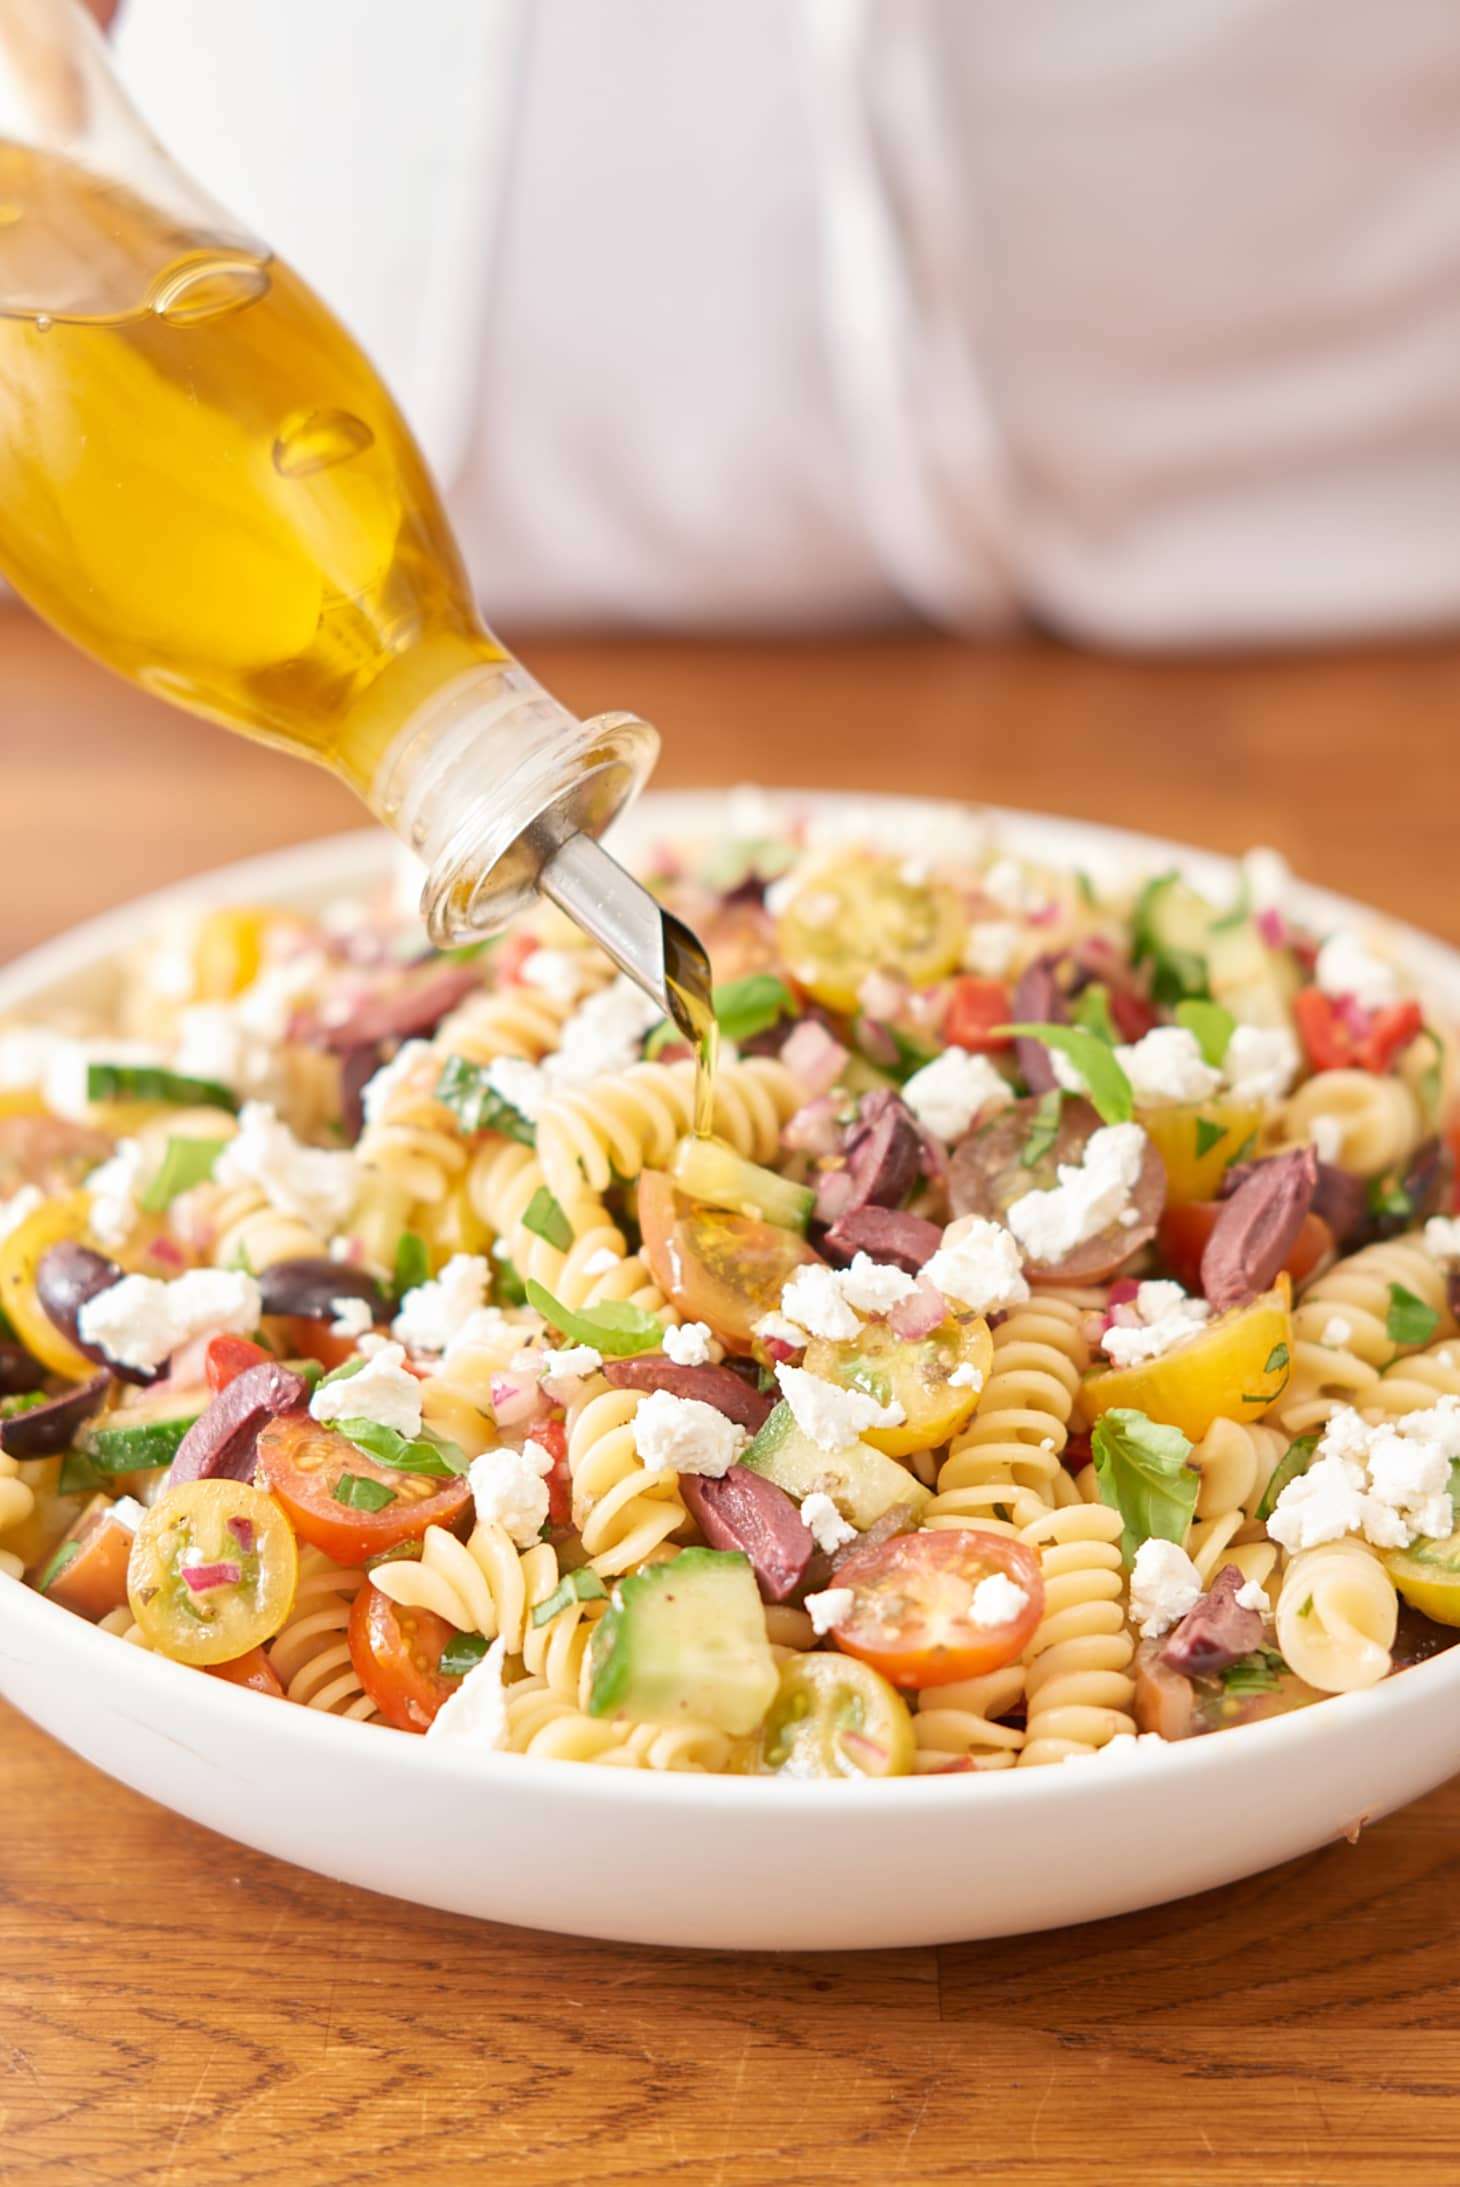 How To Make the Best Pasta Salad Without Mayo